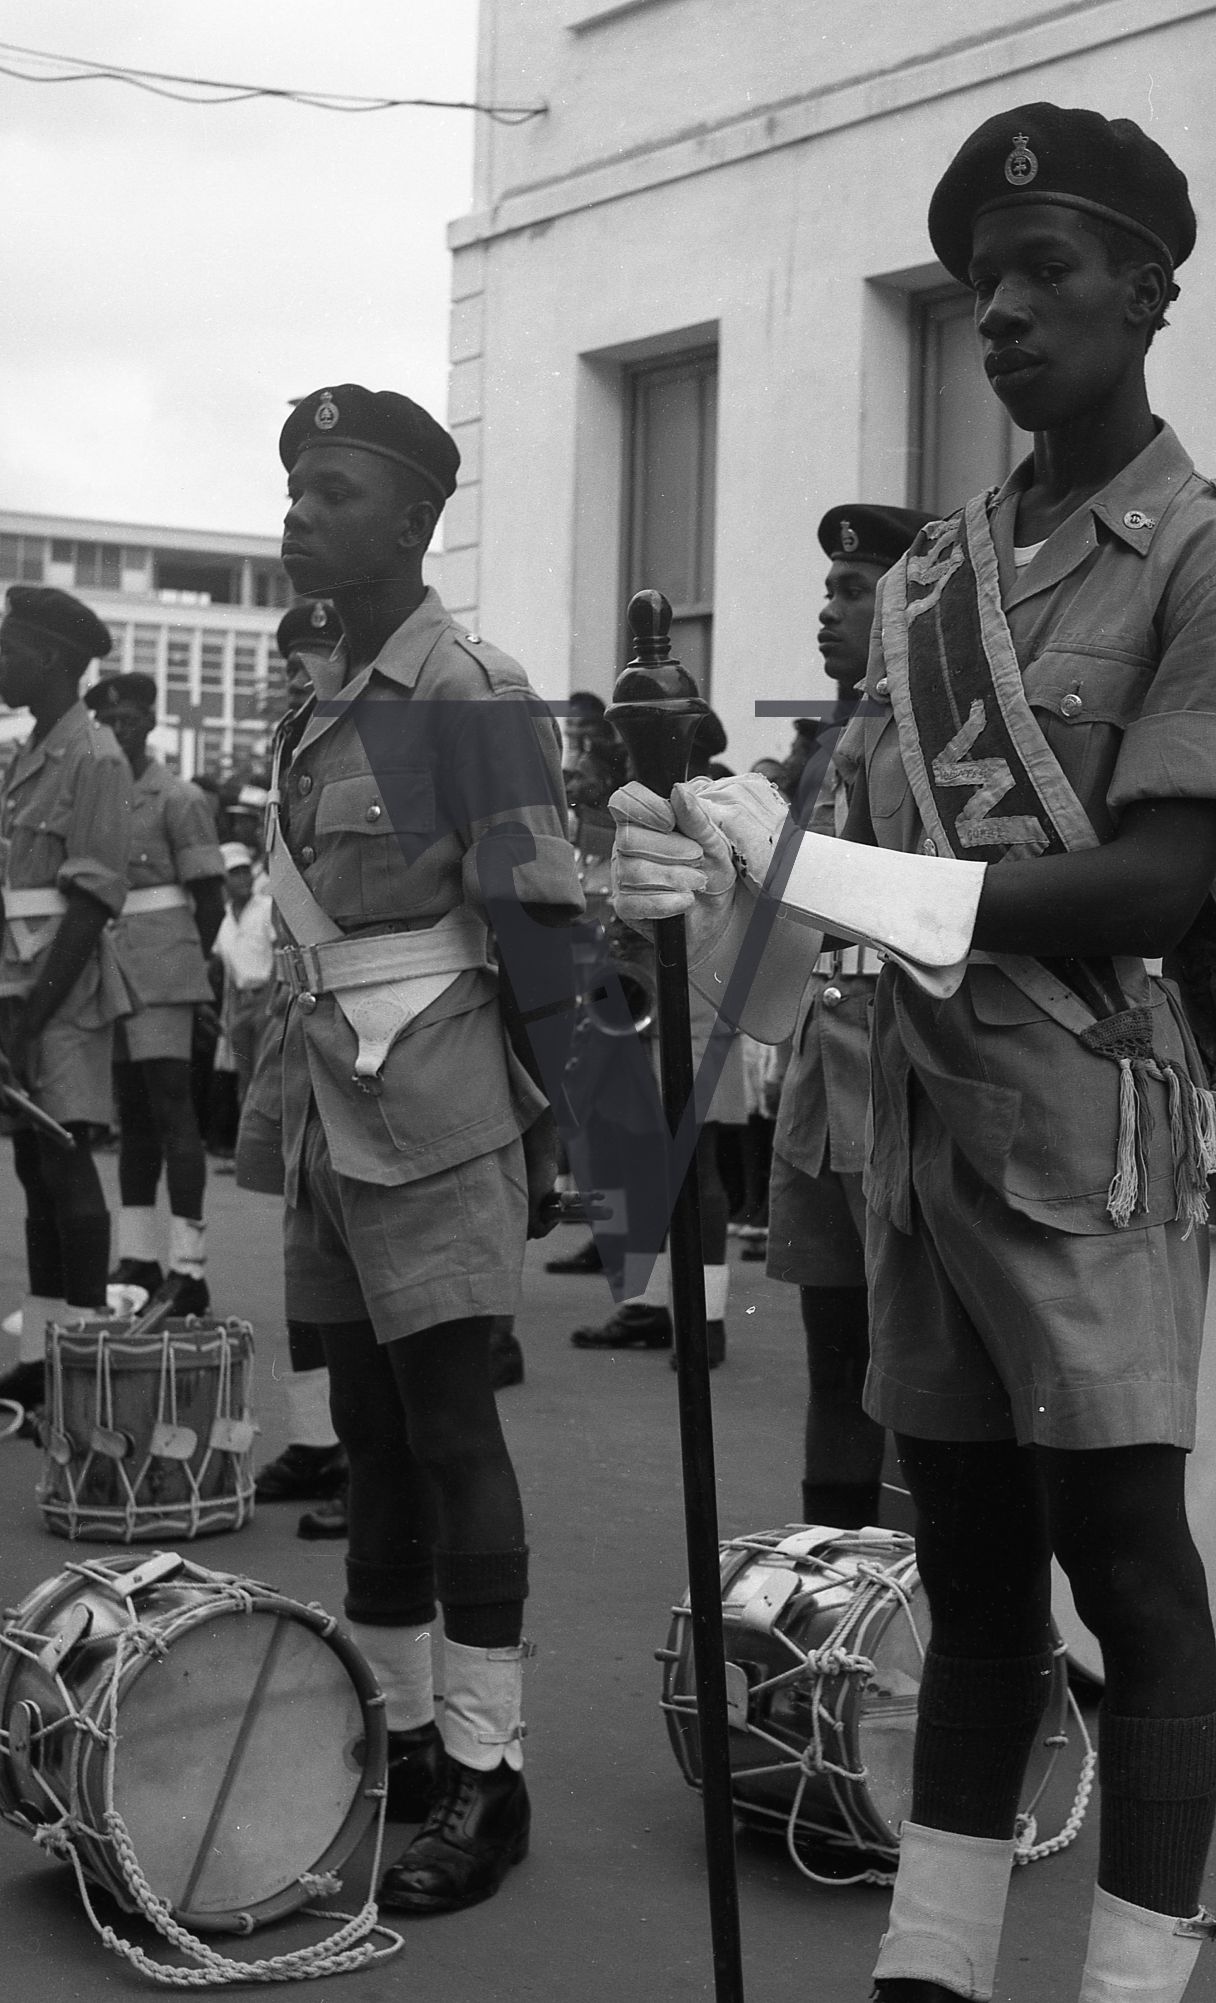 Belize, Military parade, young men in unifrom, drums on floor.